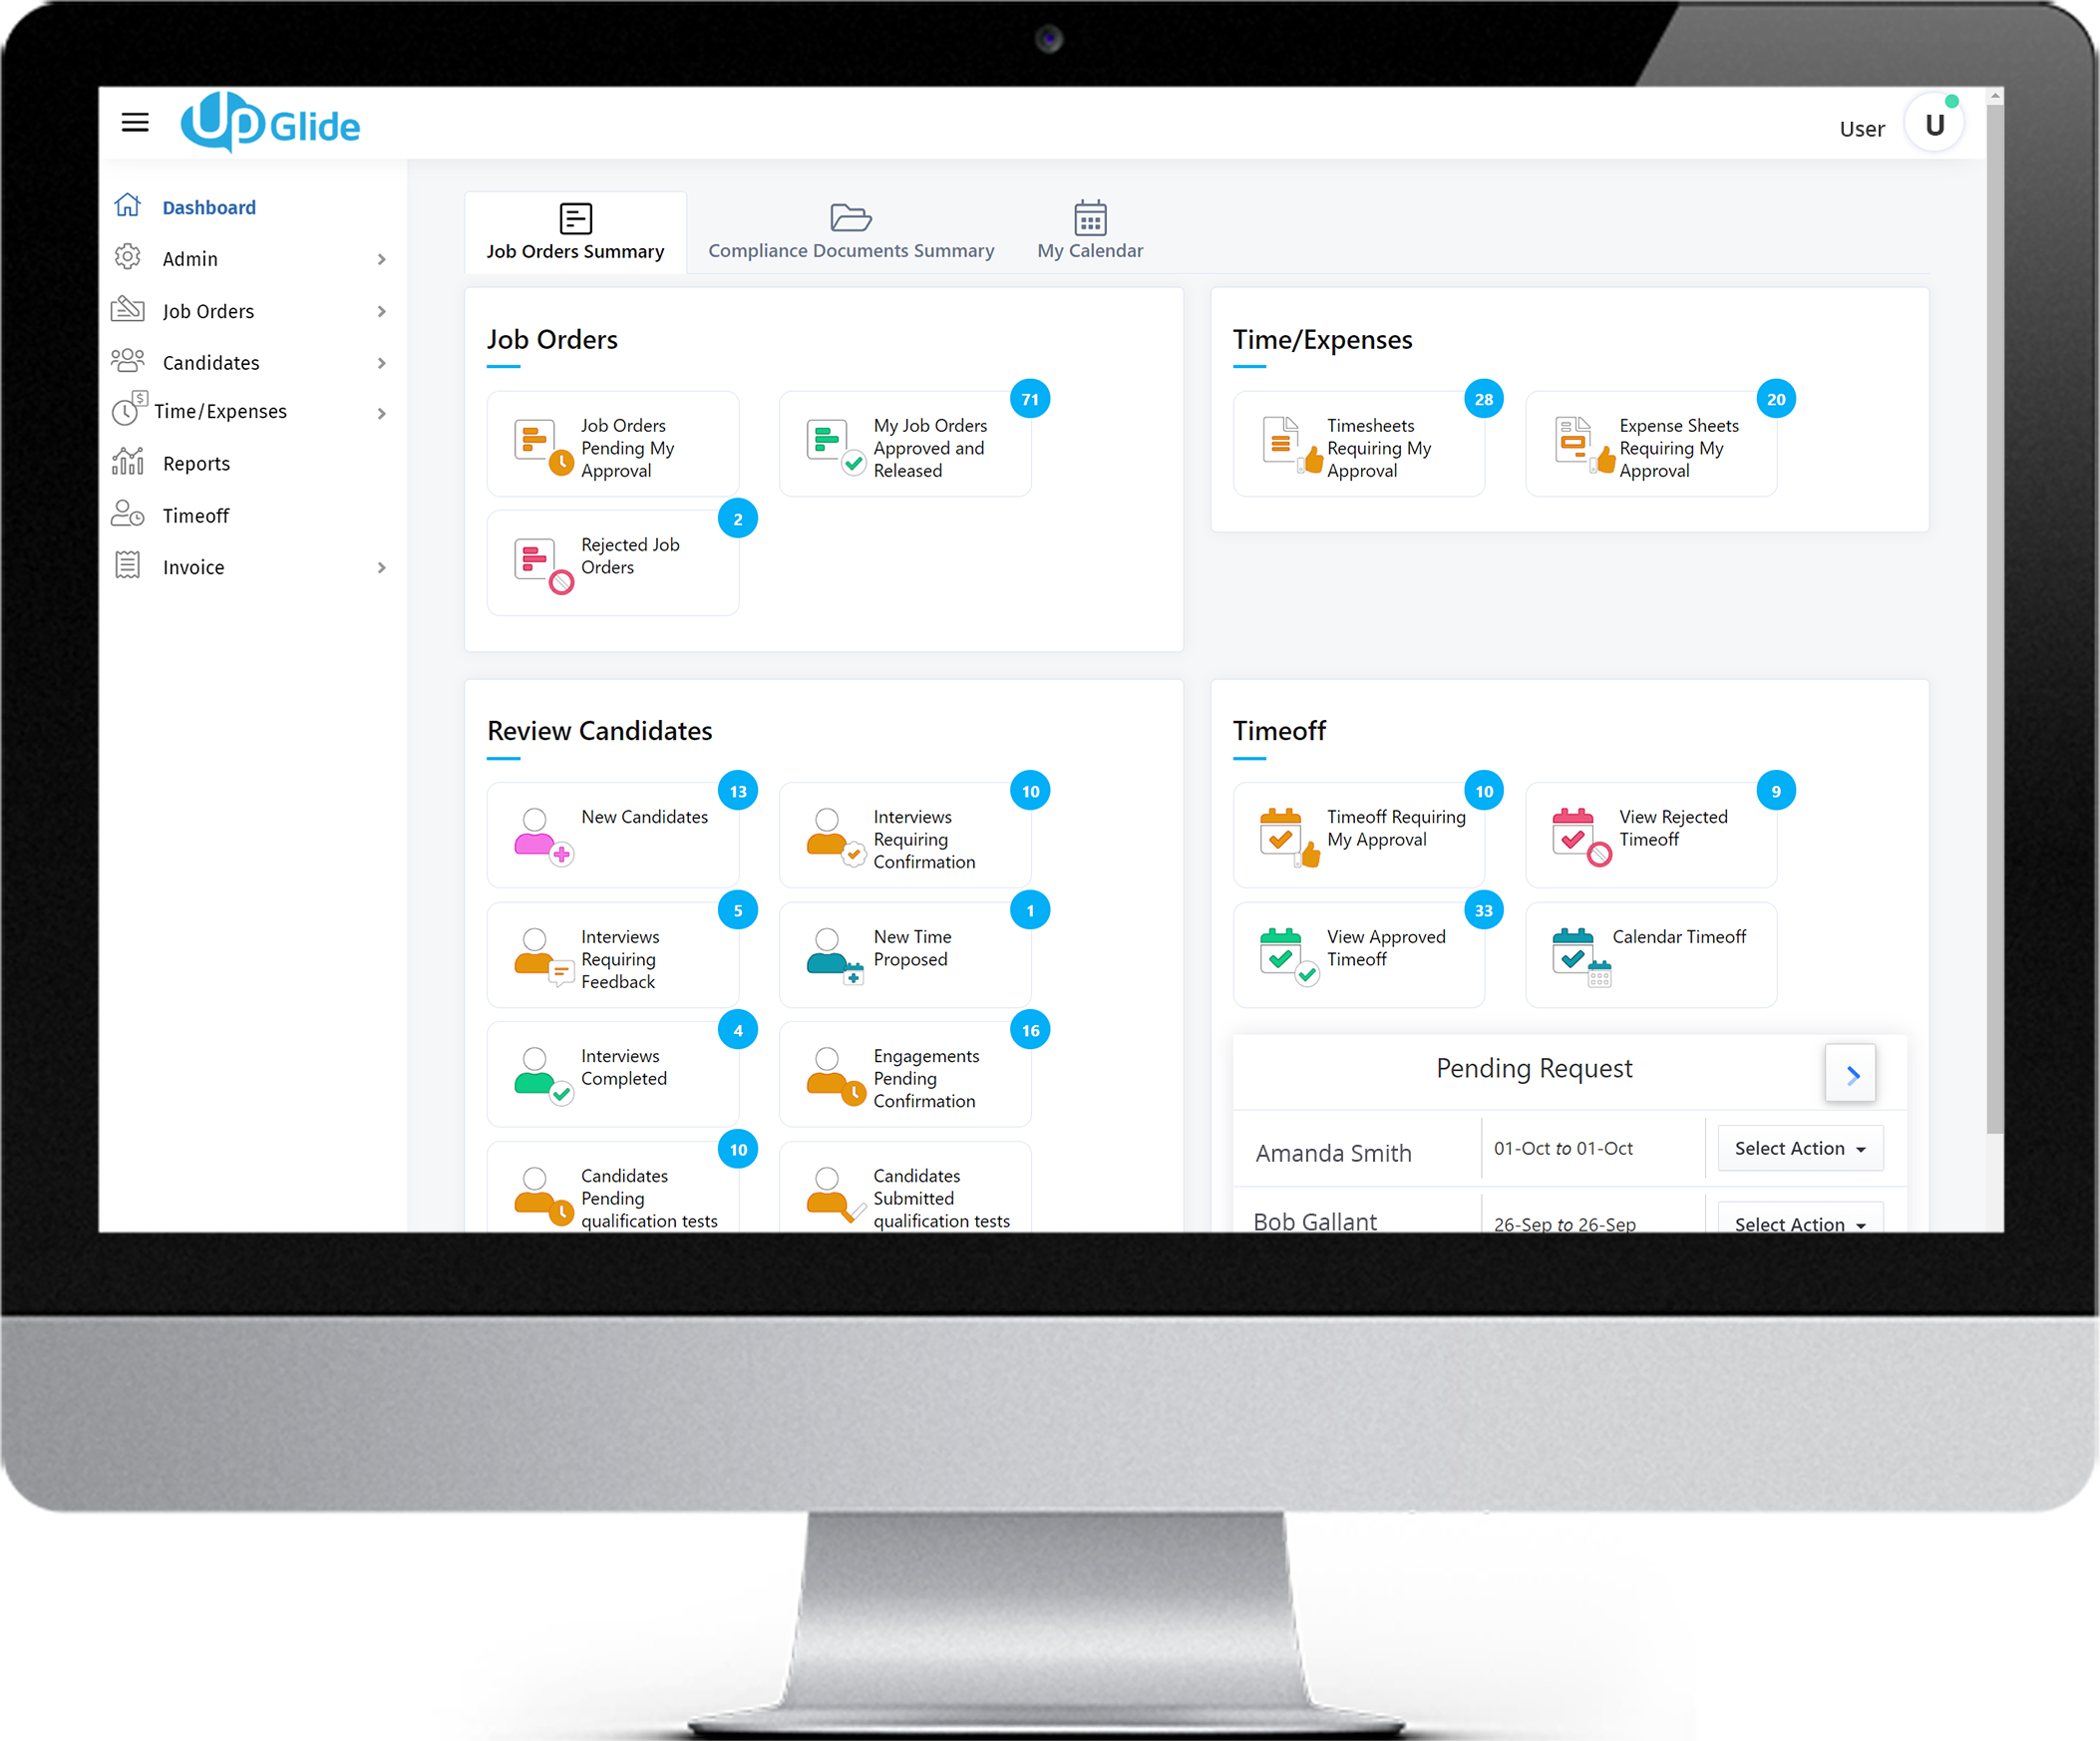 Dashboard View - Manage all workforce activities.